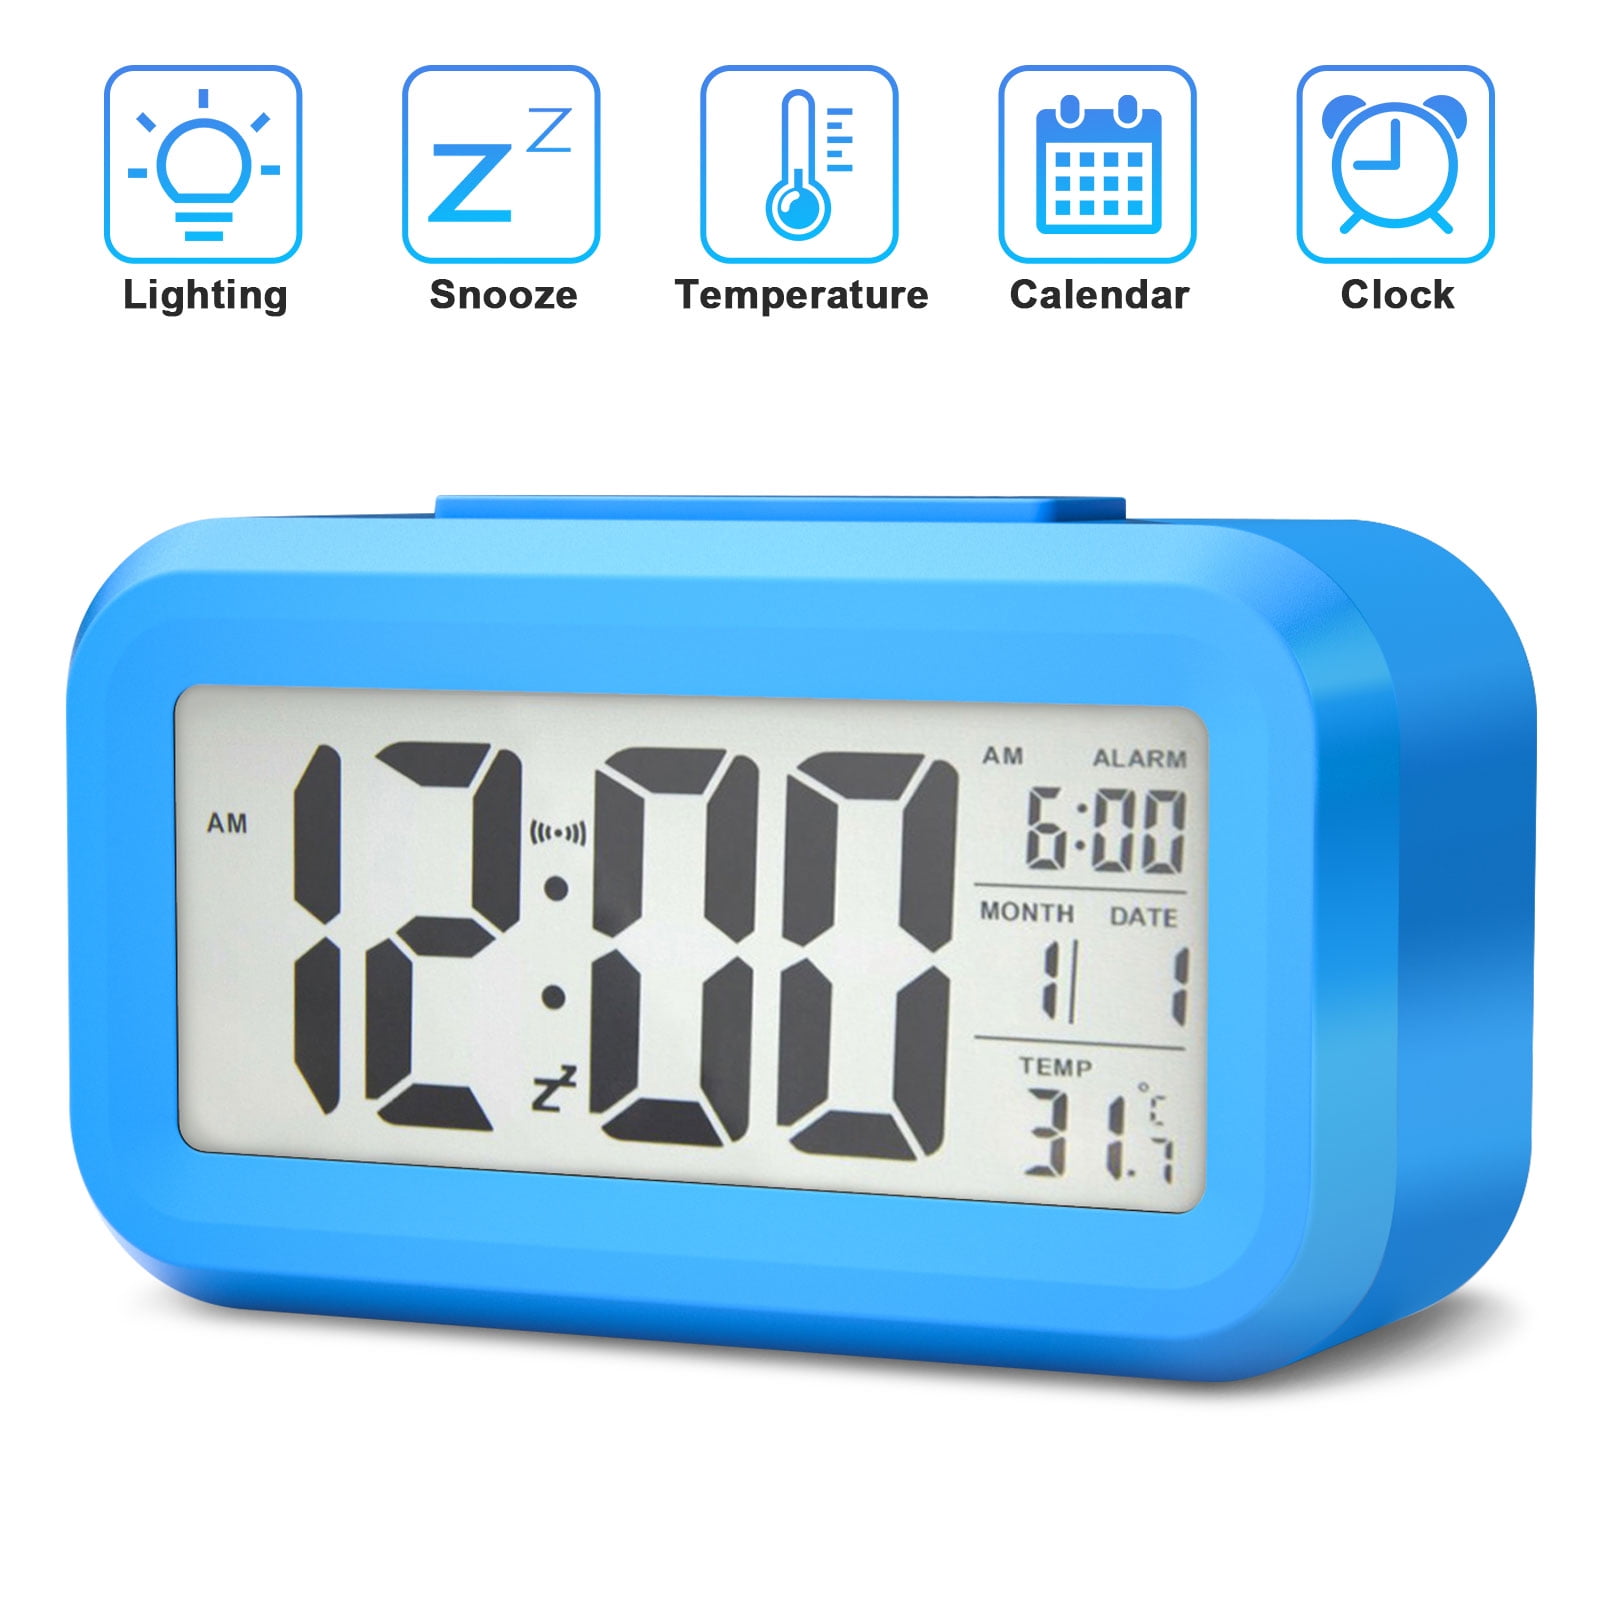 Snooze Electronic Digital Alarm Clock LED Light Control Thermometer new bs 